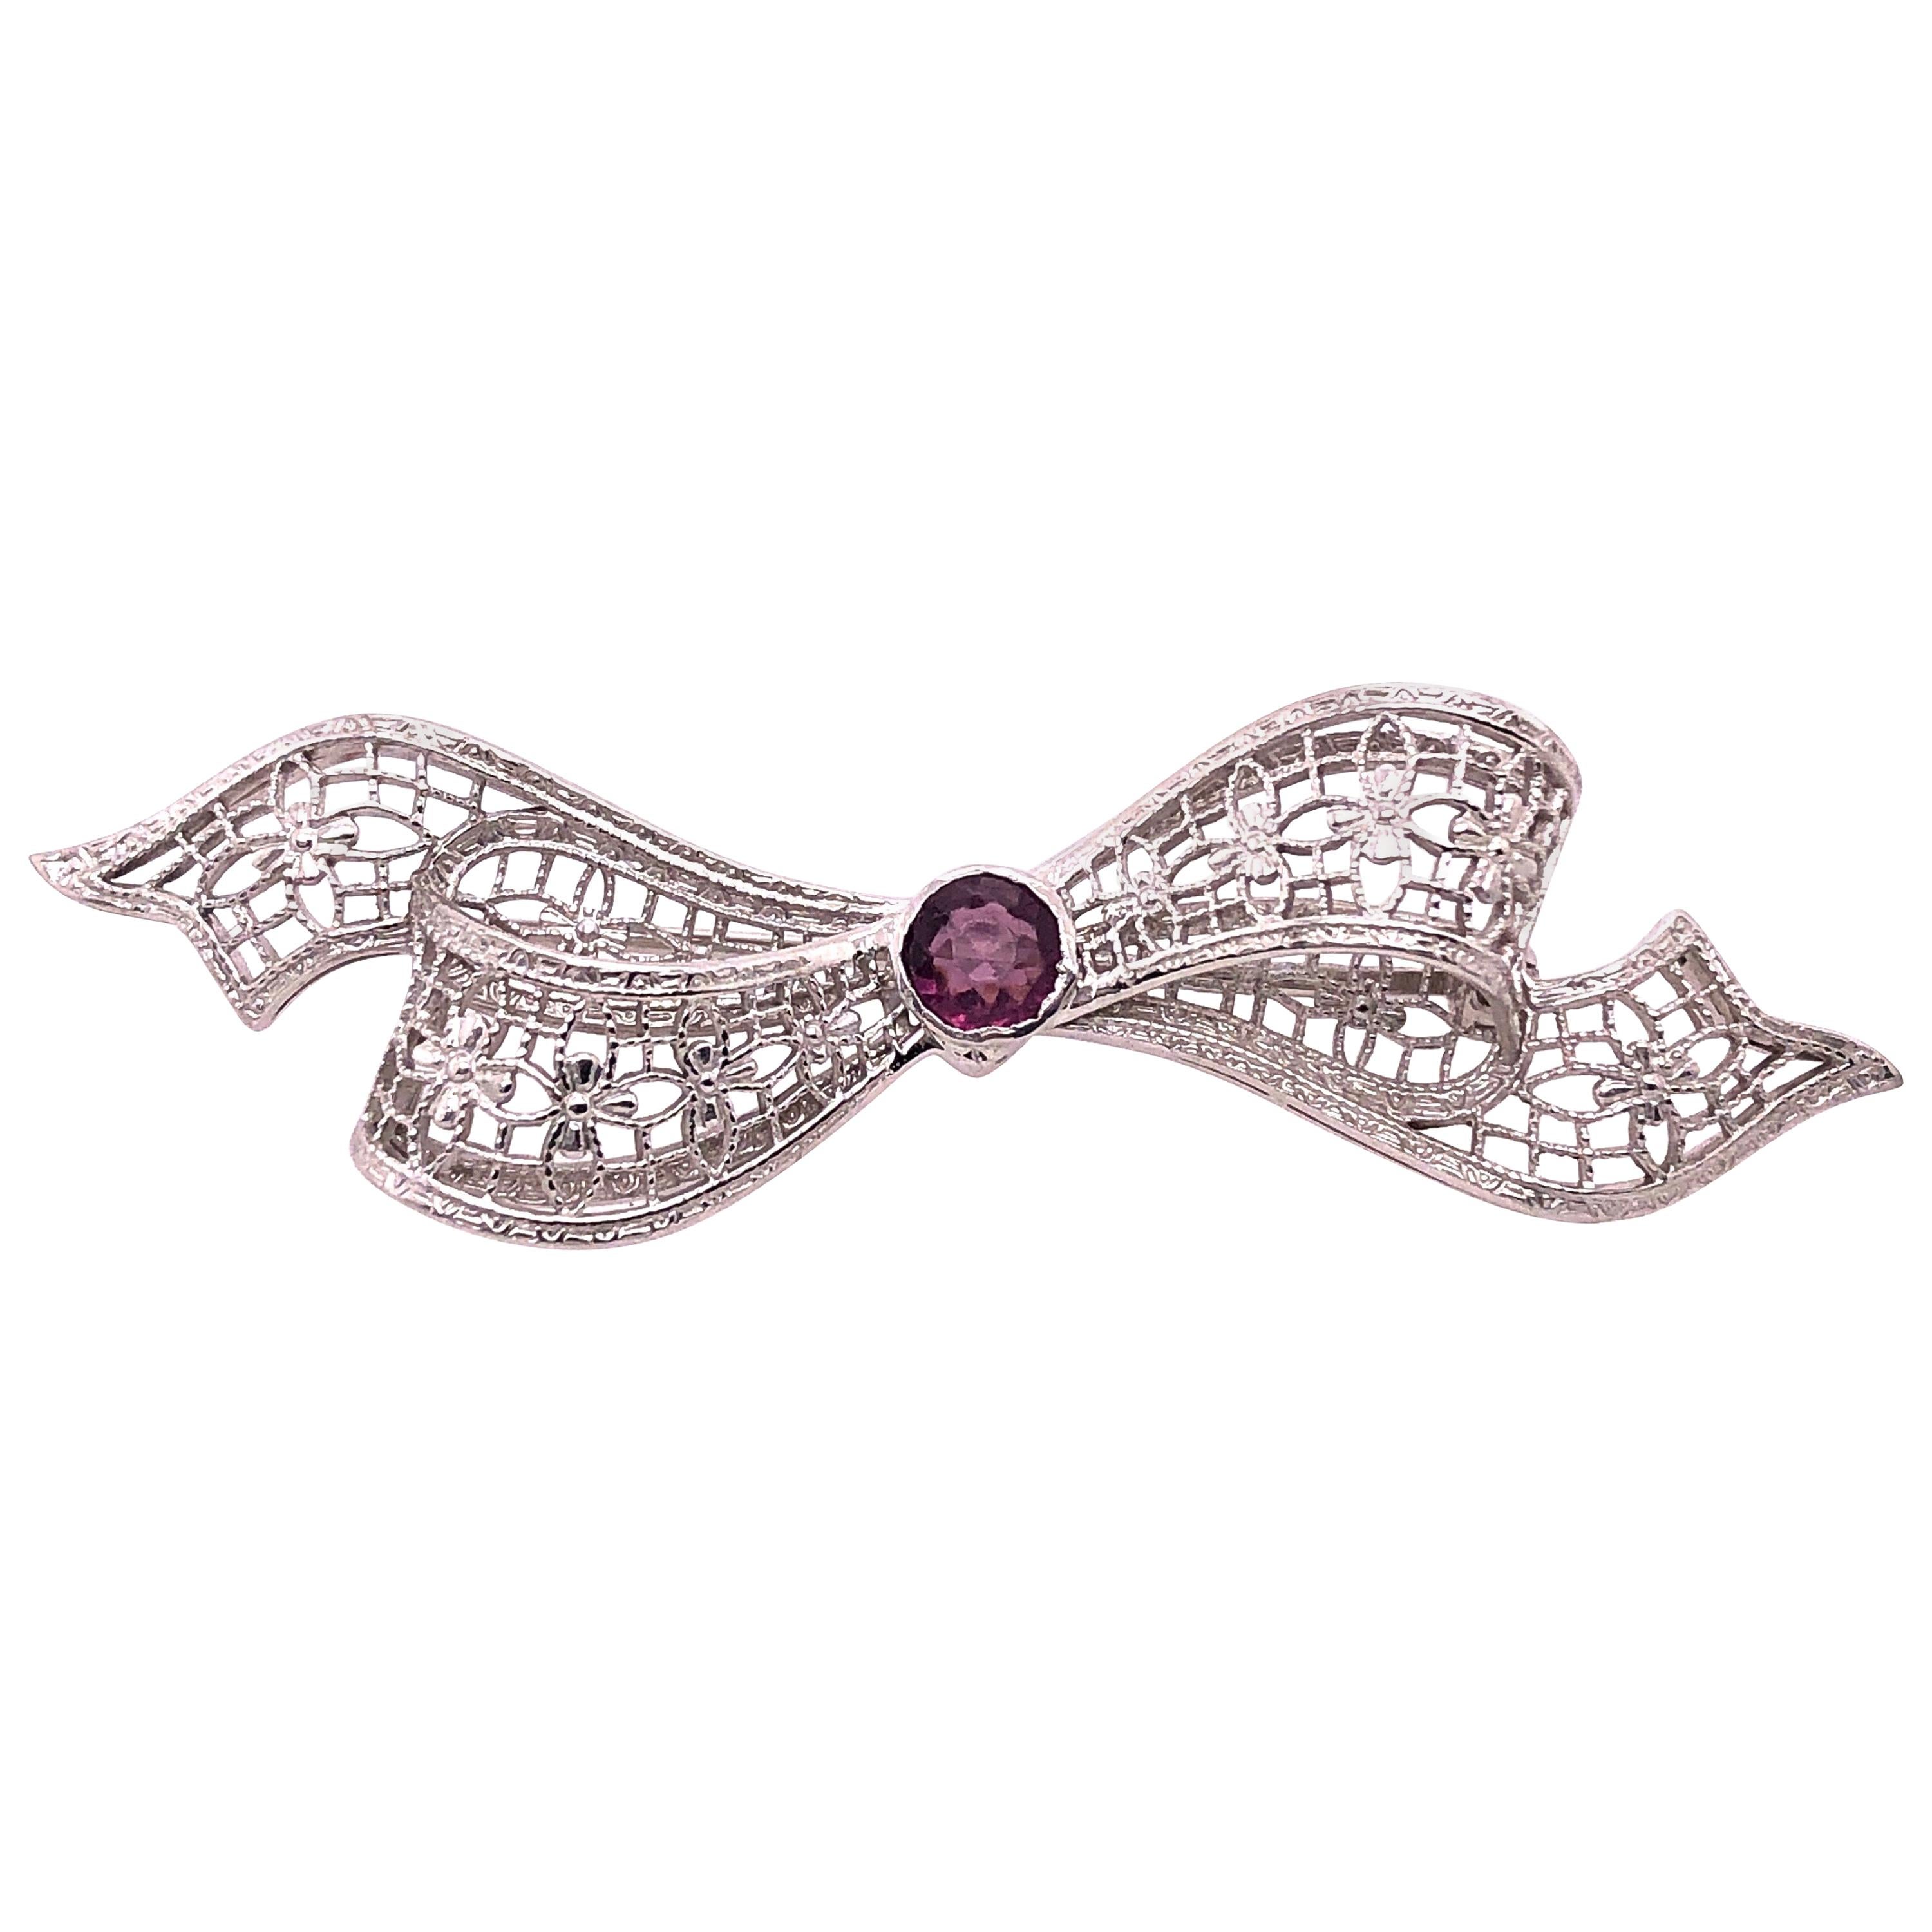 14 Karat White Gold Brooch Filigree Bow Design with Amethyst Center Stone Pin For Sale